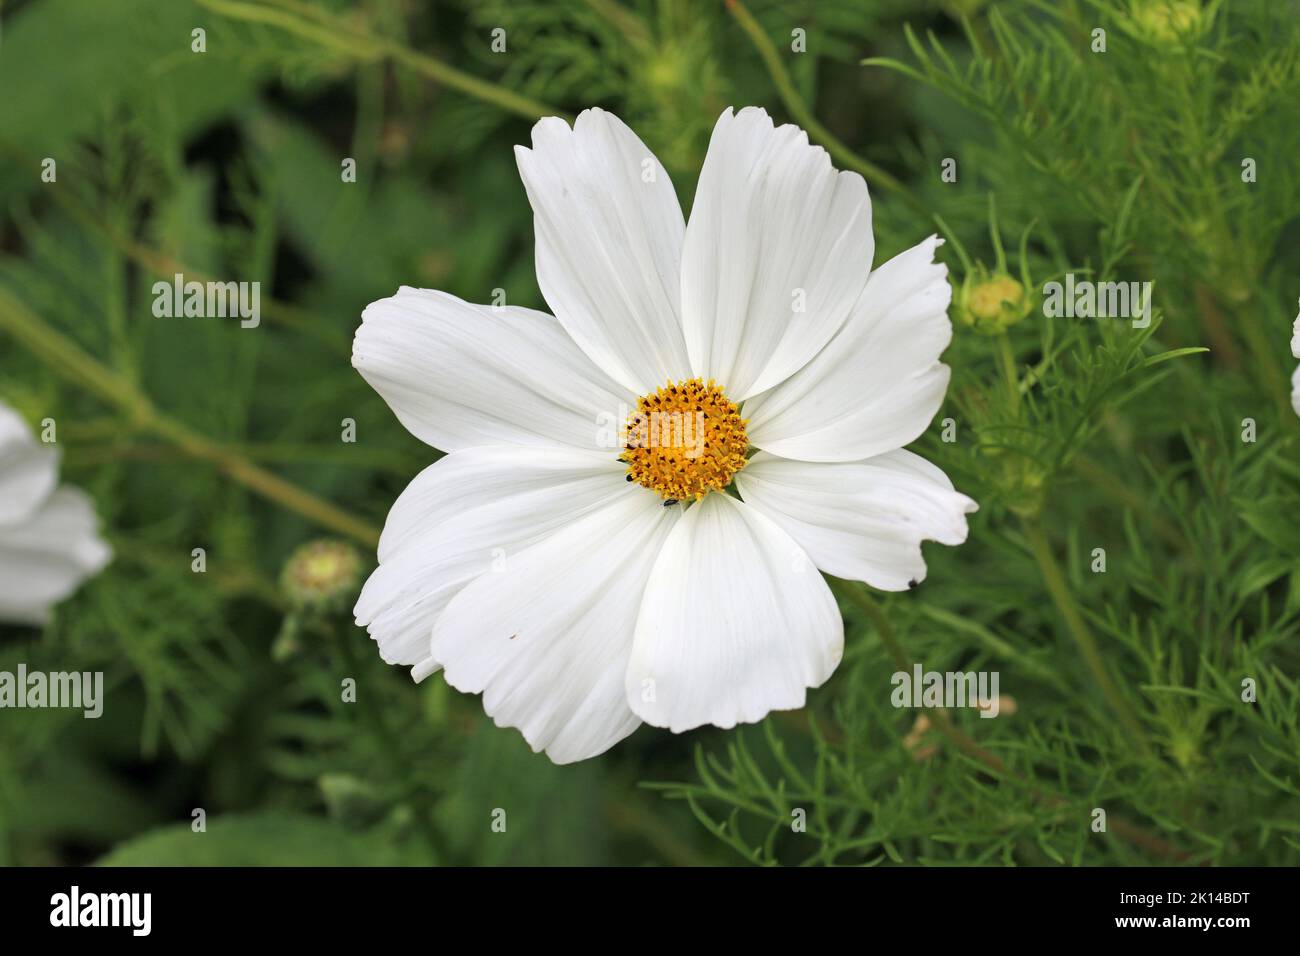 White Mexican aster flower, Cosmos bipinnatus, in close up with blurred leaves and buds in the background. Stock Photo